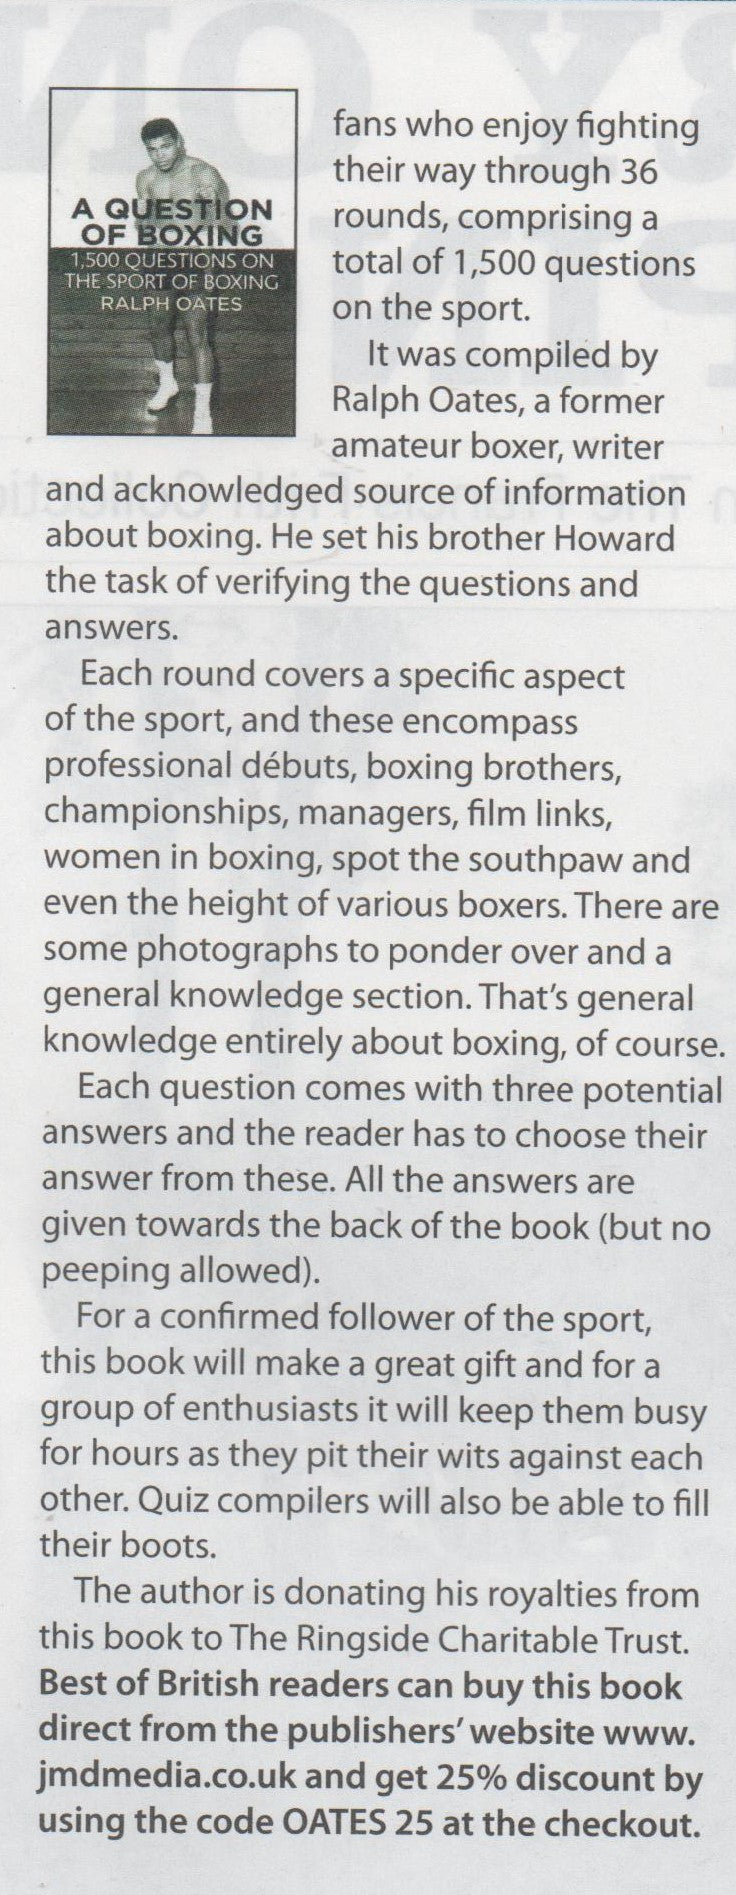 A Question of Boxing - 1500 questions on the sport of Boxing